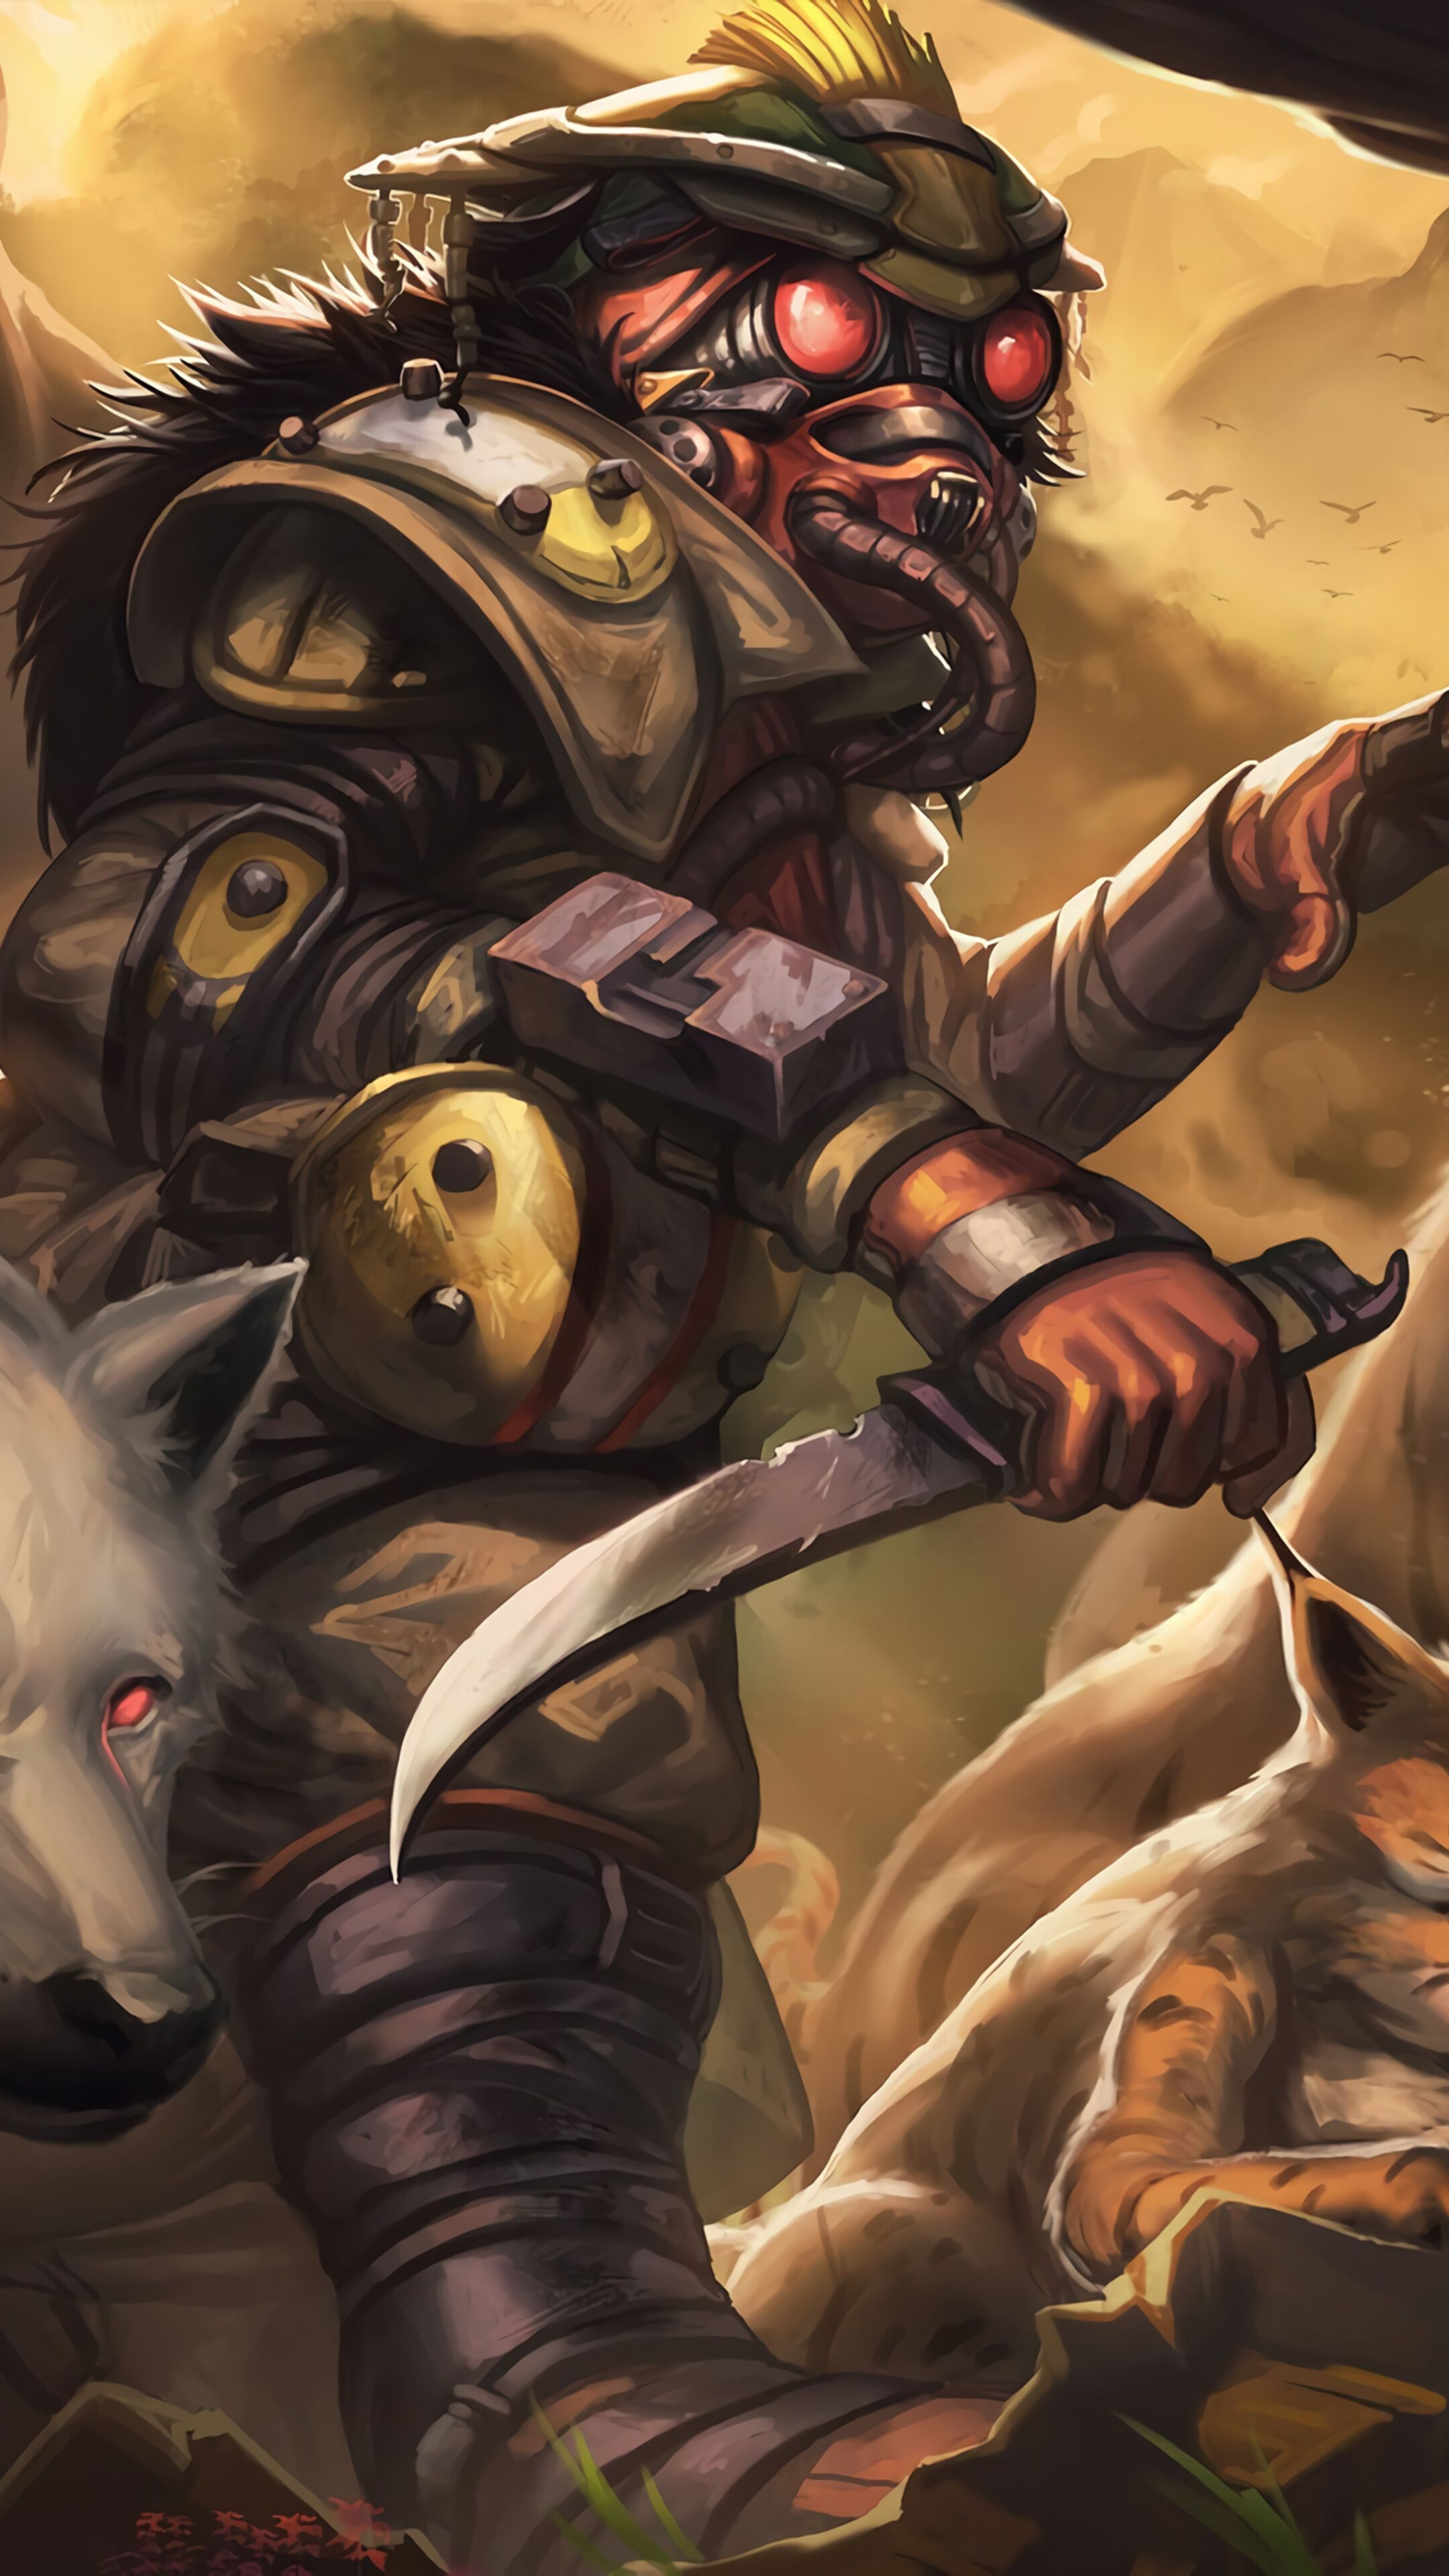 Apex Legends: Bloodhound, Can ping clues for teammates. 2160x3840 4K Background.